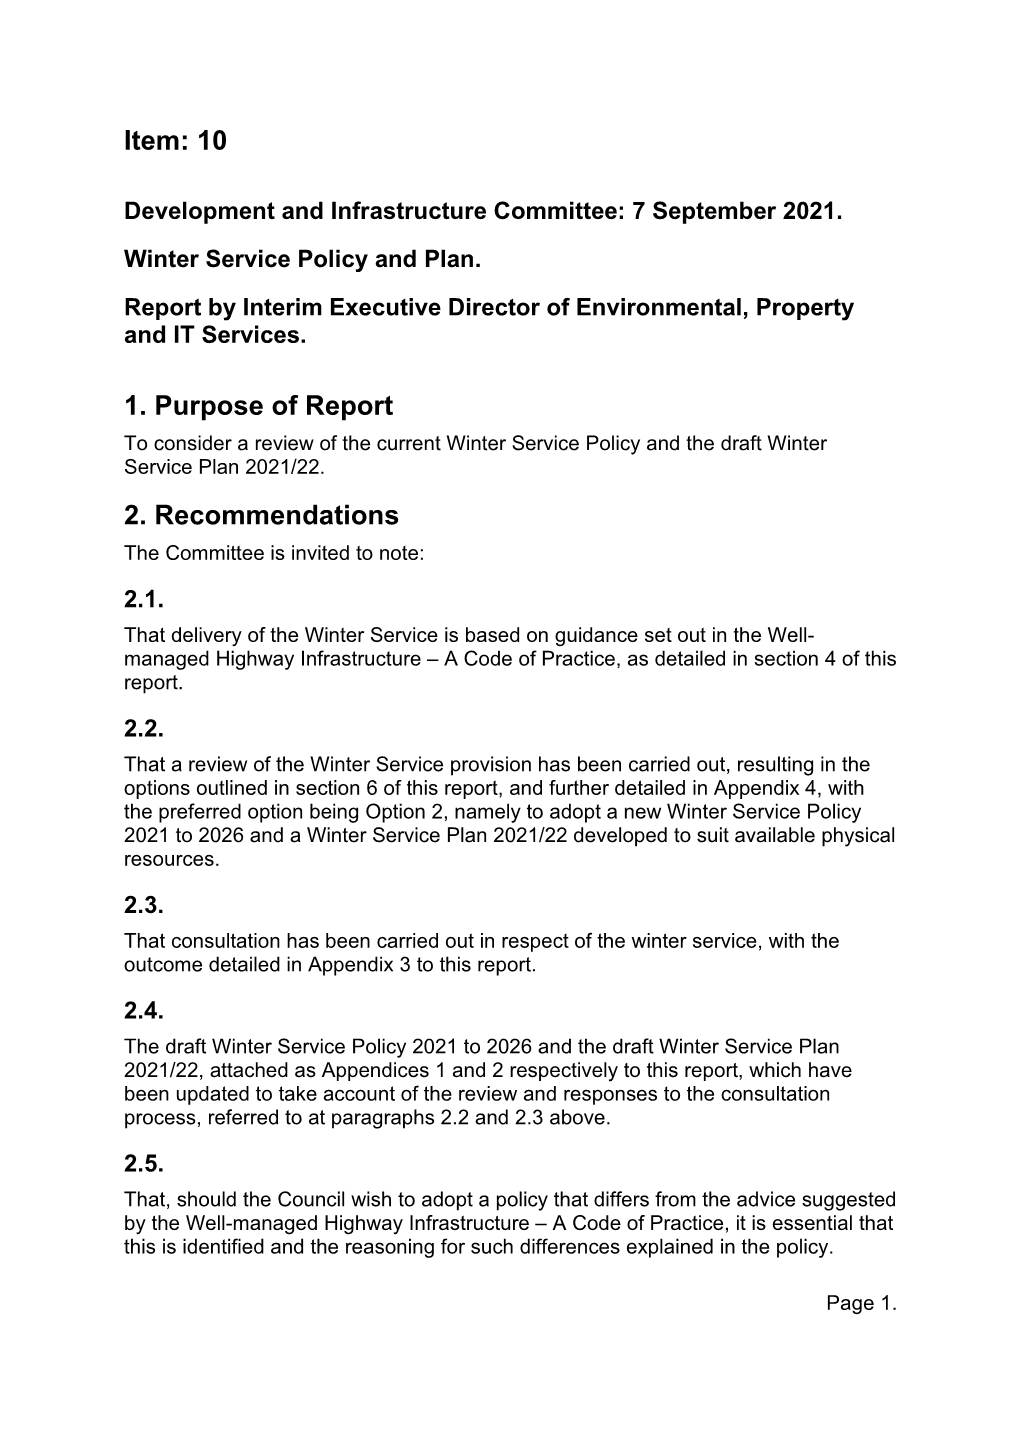 Item 10: Winter Service Policy and Plan